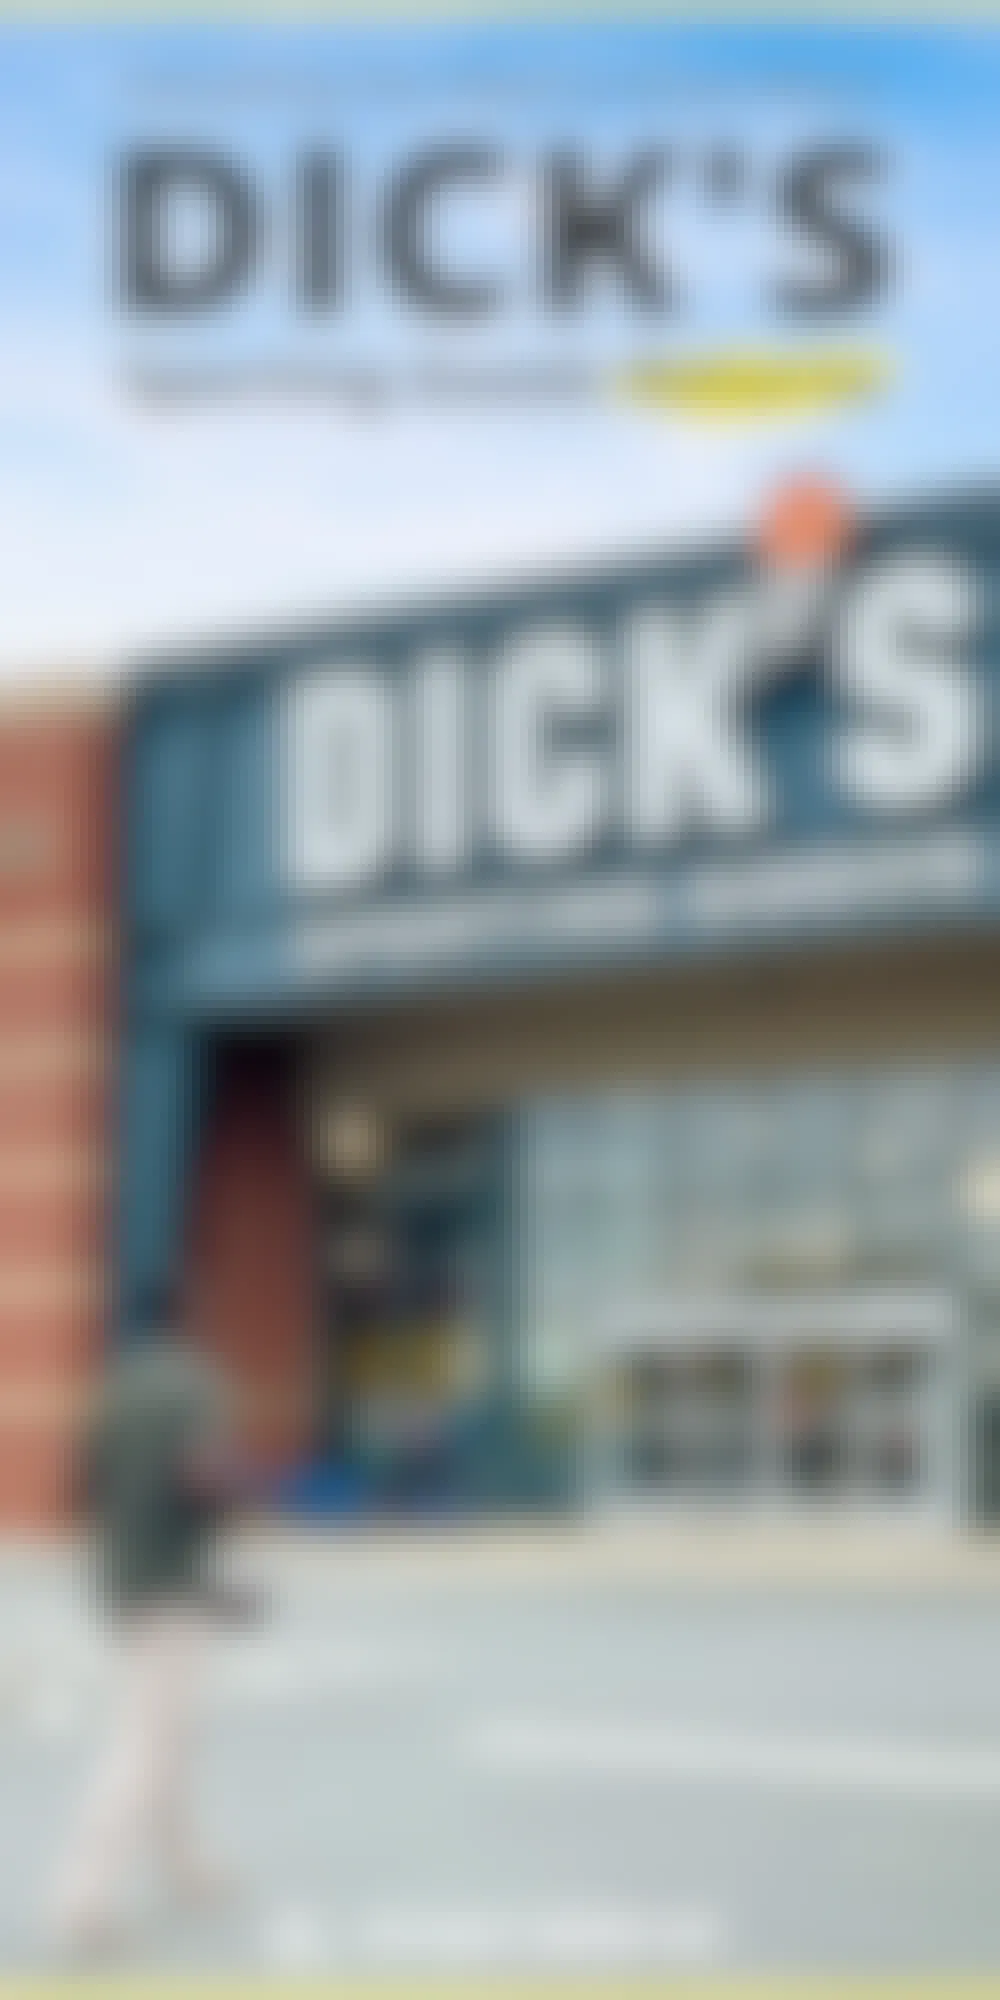 Dick's Return Policy is Great. But It Has Too Many Exceptions.